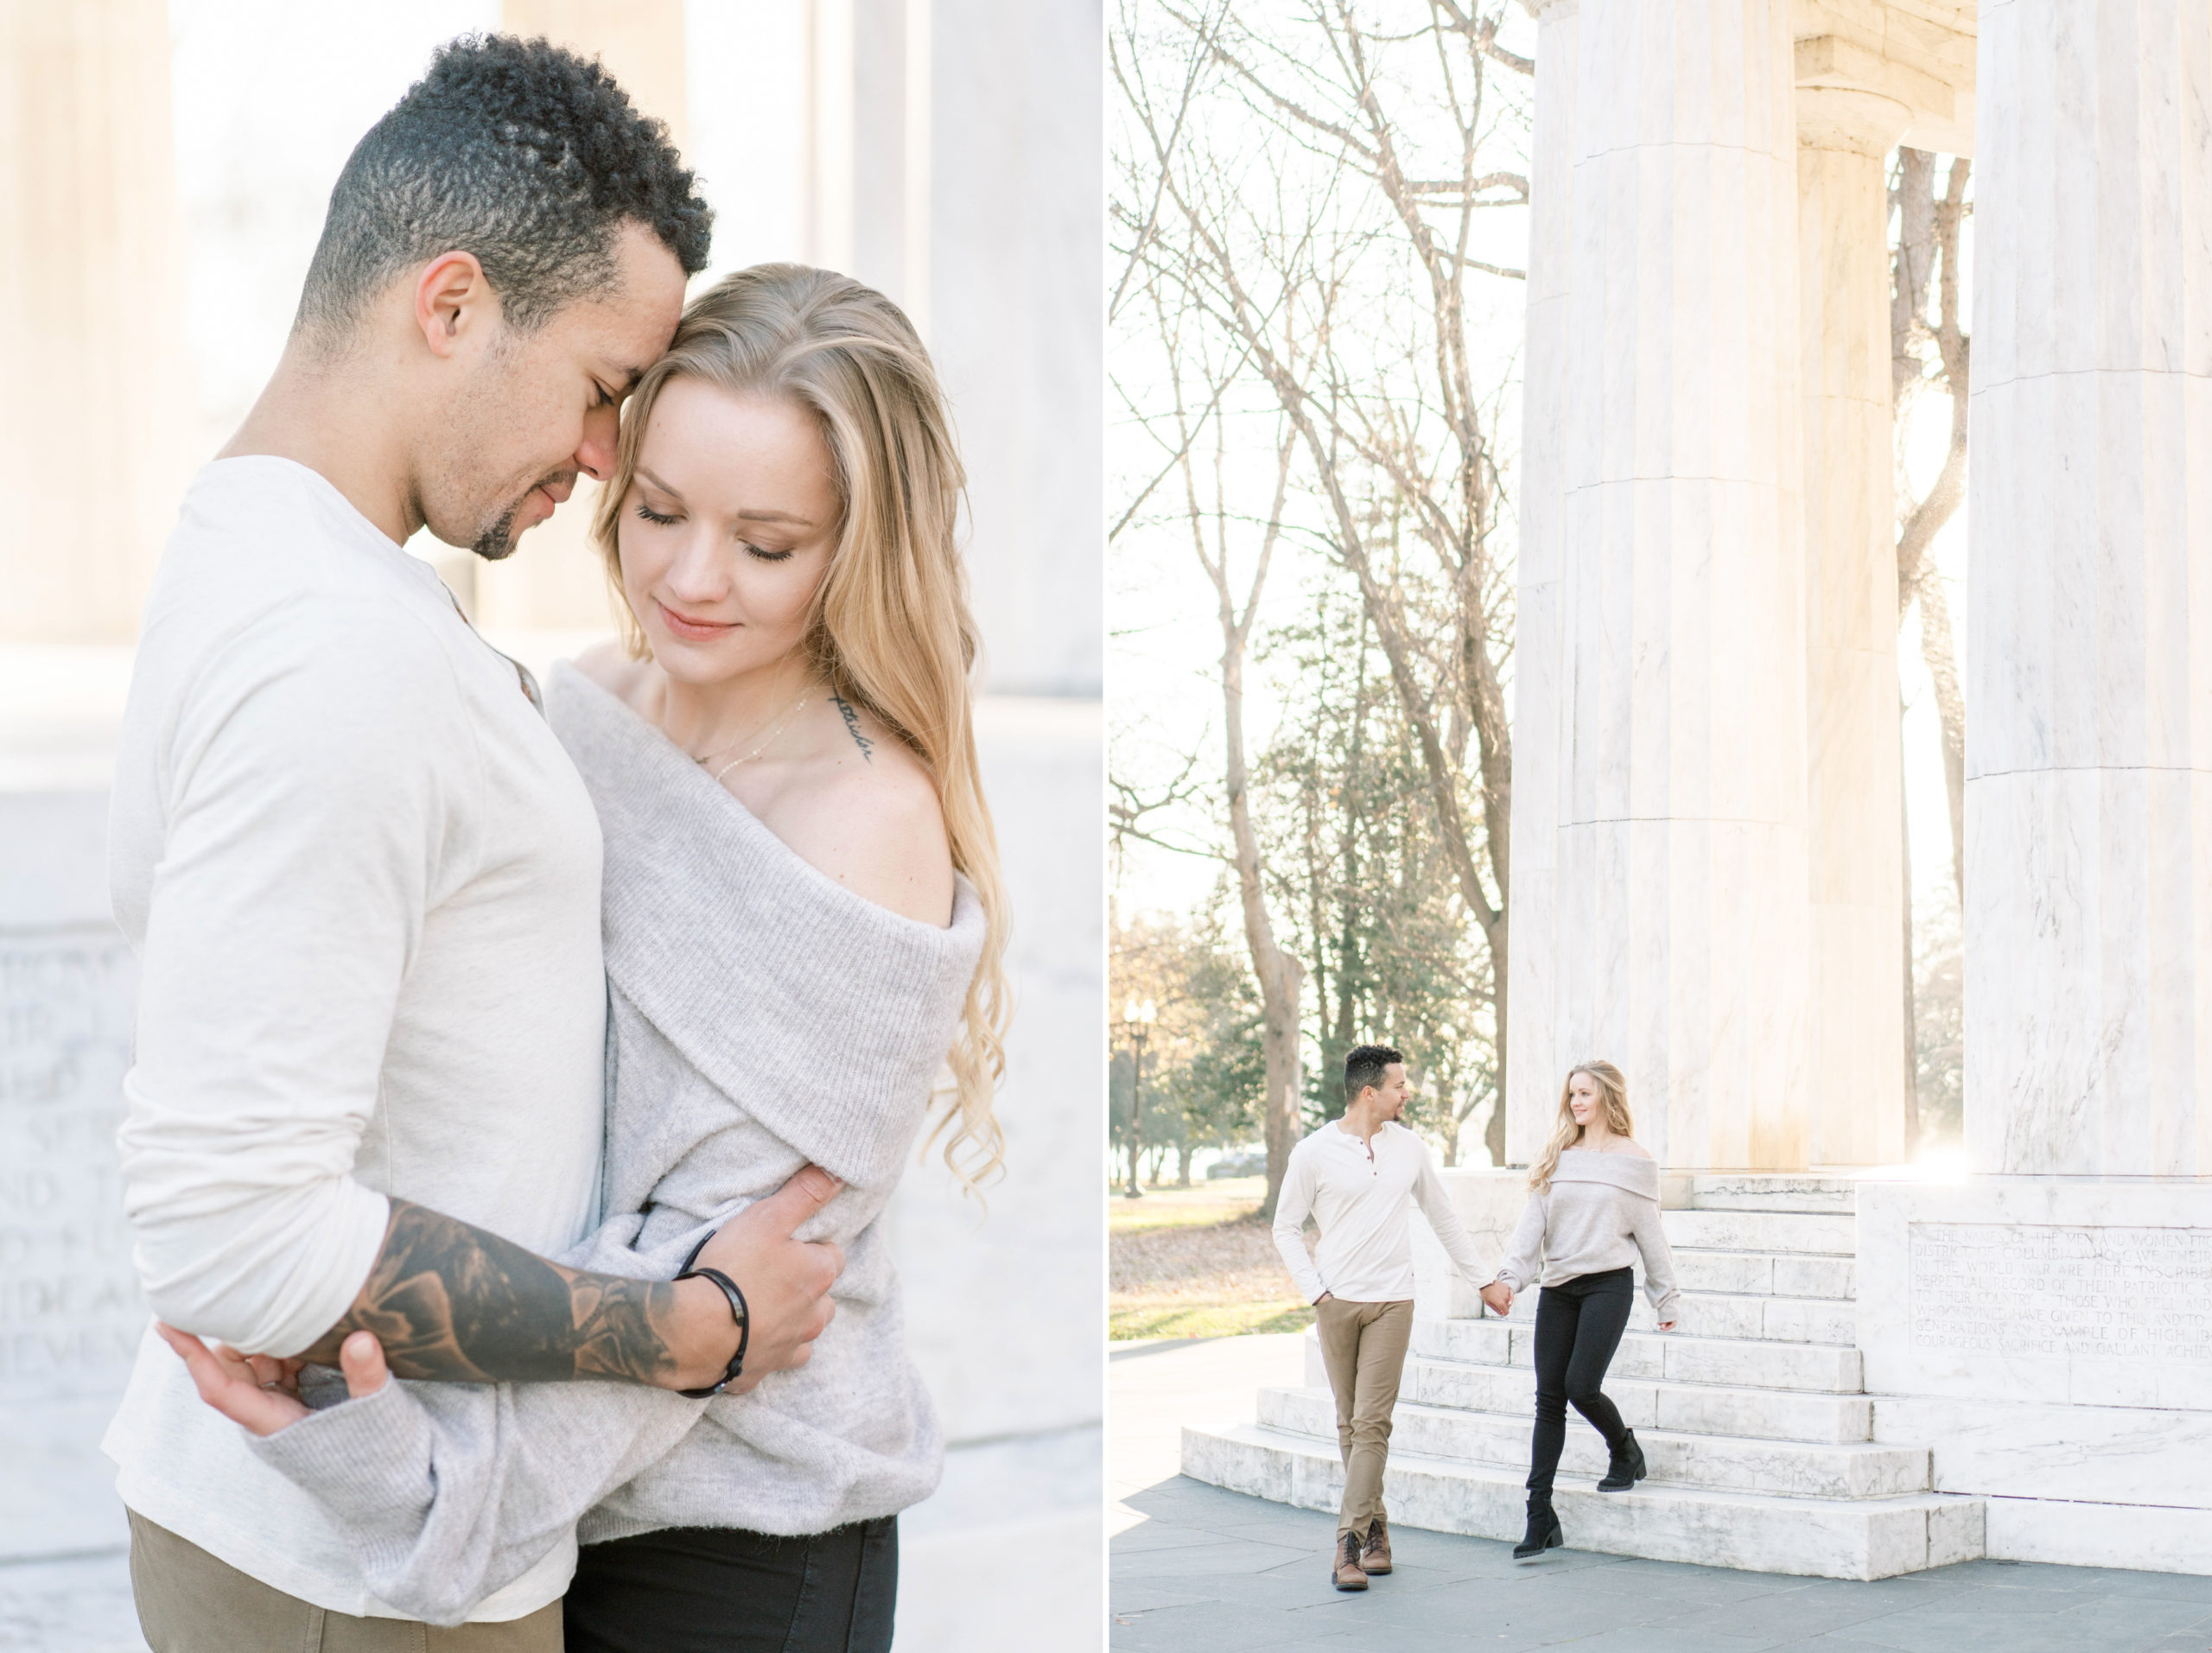 A winter engagement session in Washington, DC at the National Mall featuring iconic sites such as the Lincoln Memorial and Reflecting Pool.